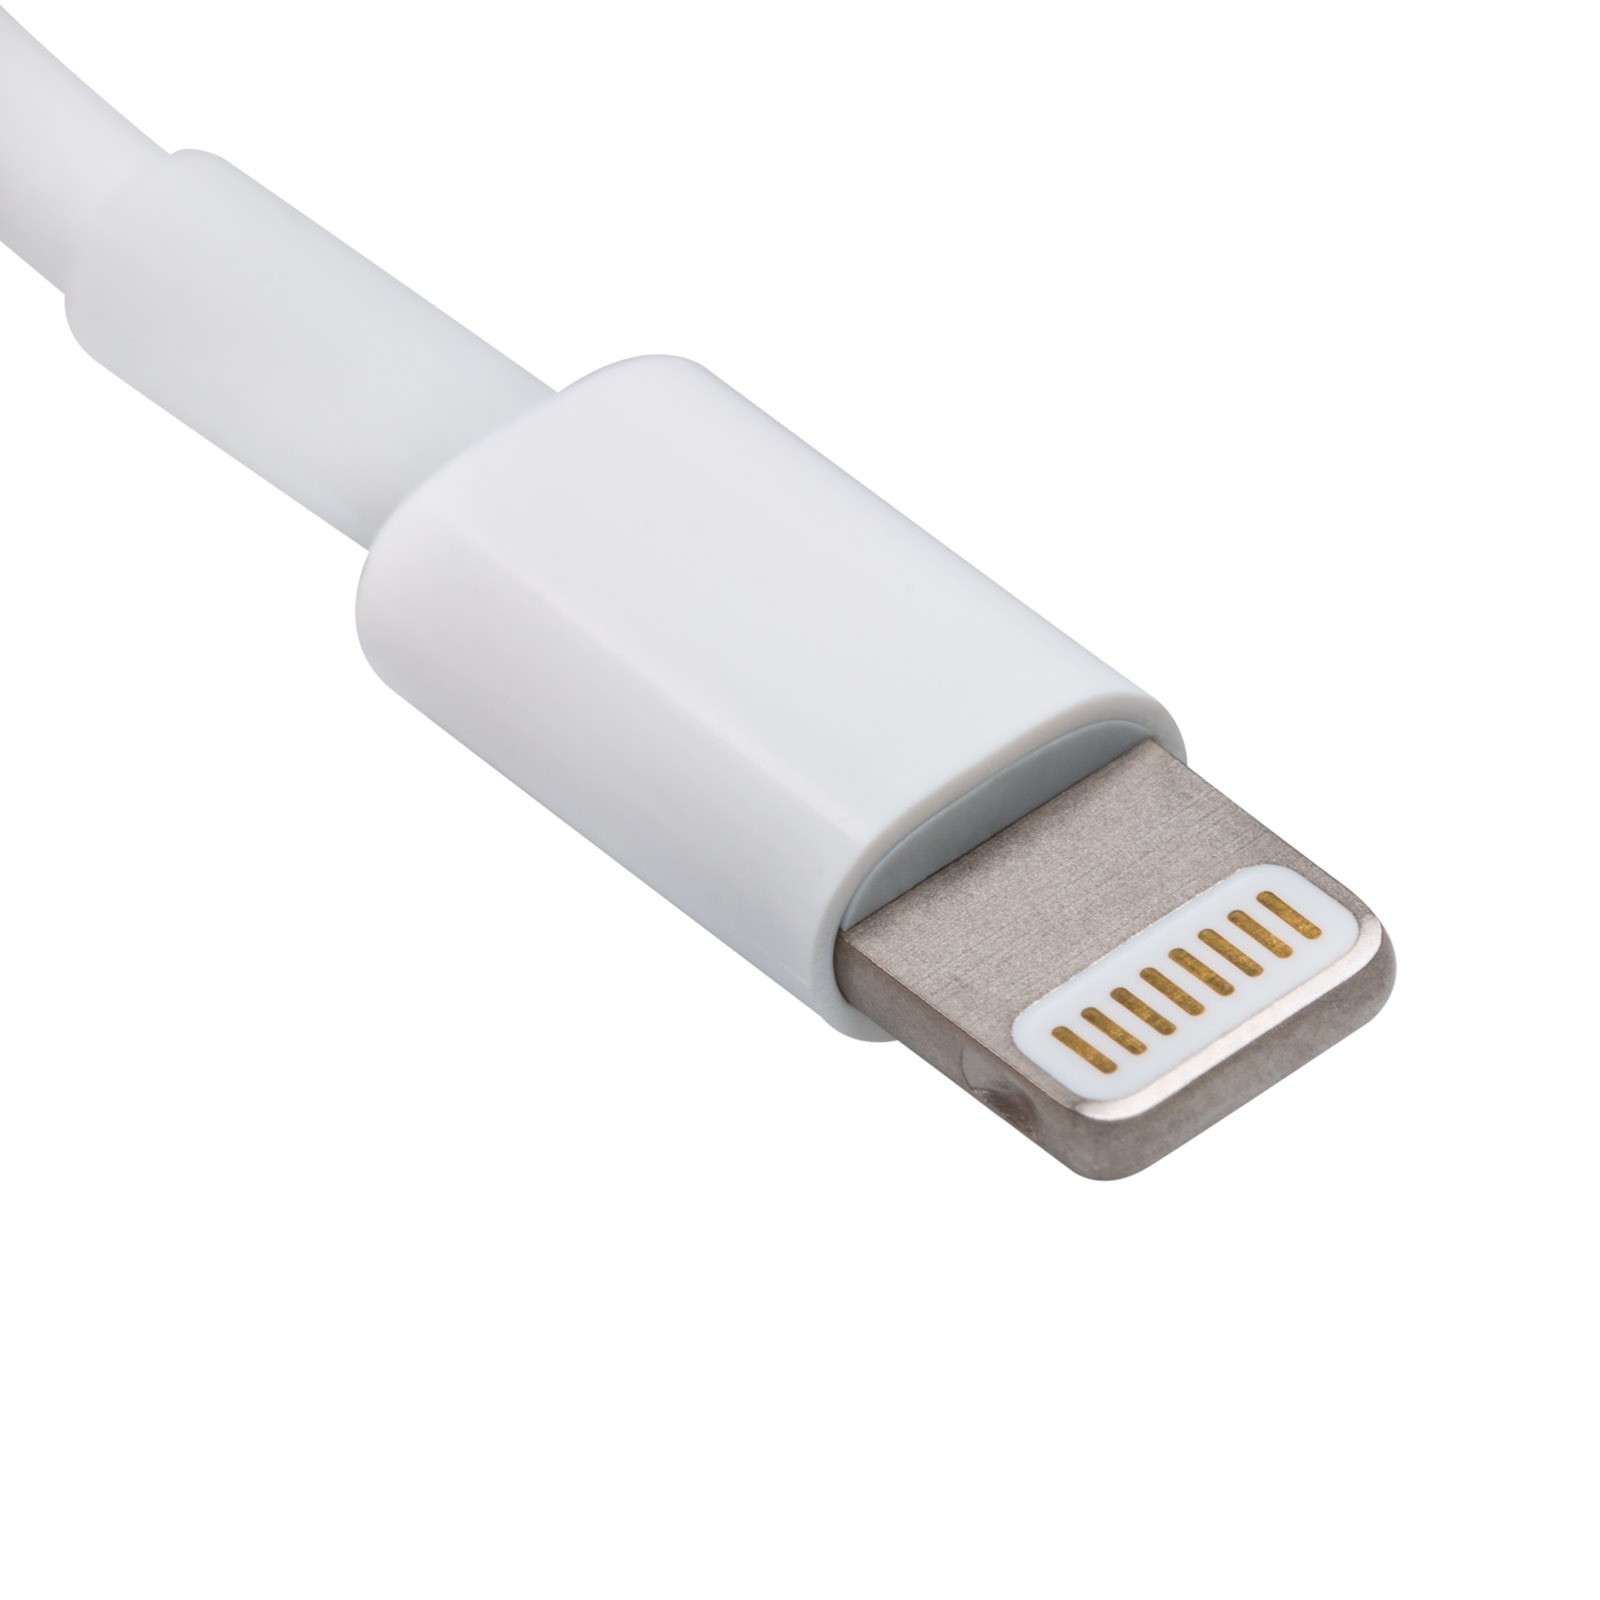 iOS Lightning Cable to USB